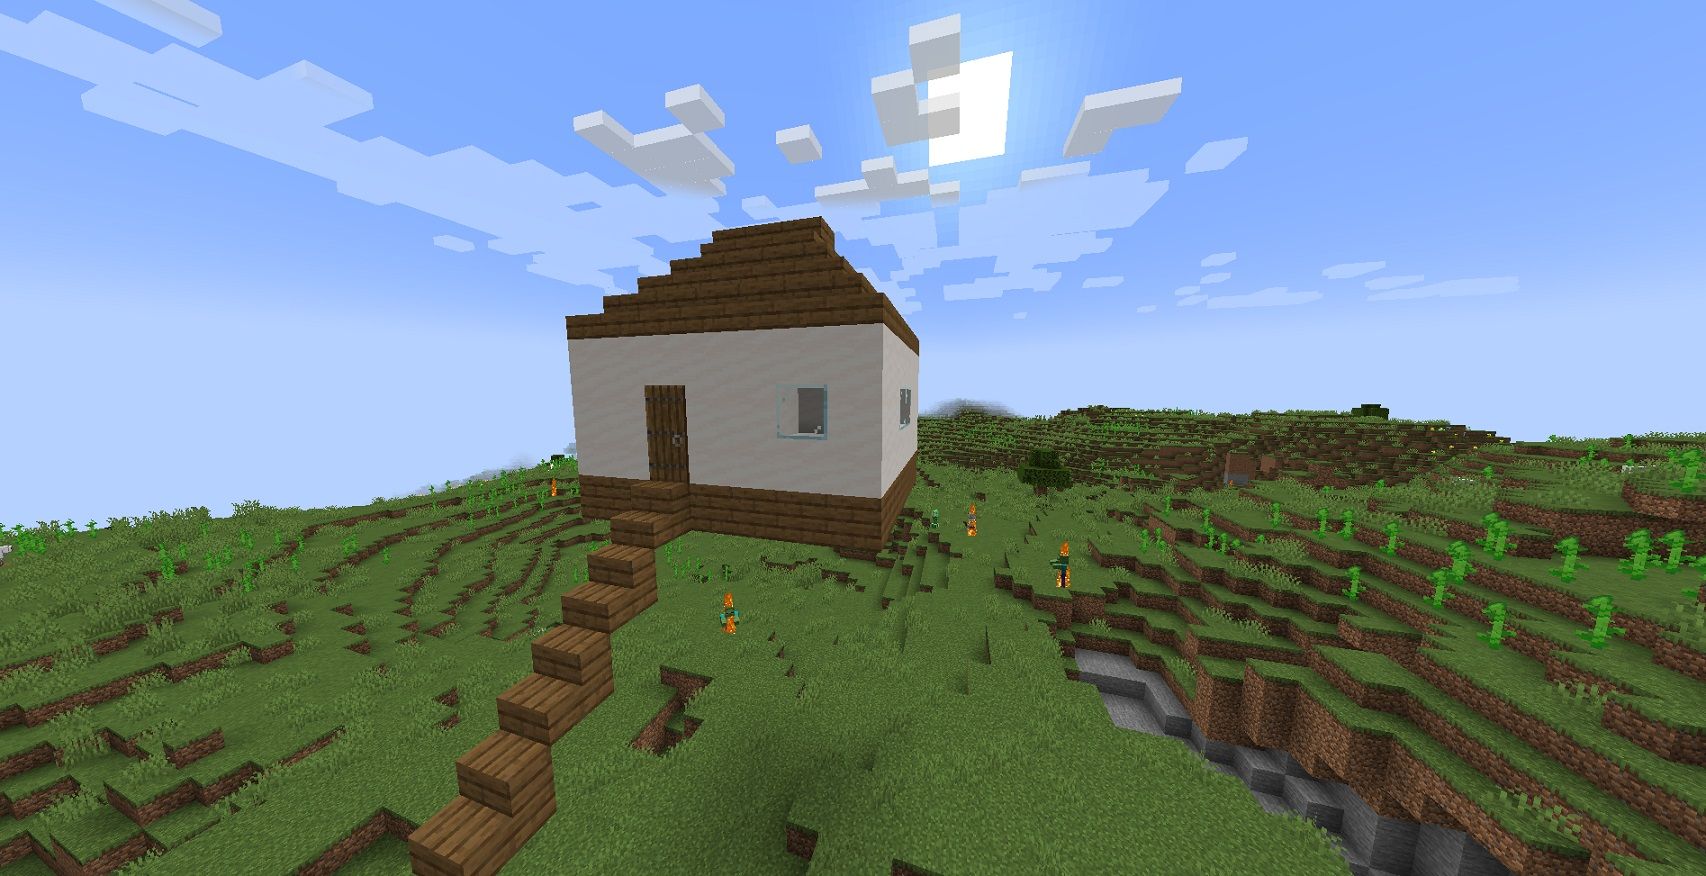 A small Minecraft house in the middle of an open field